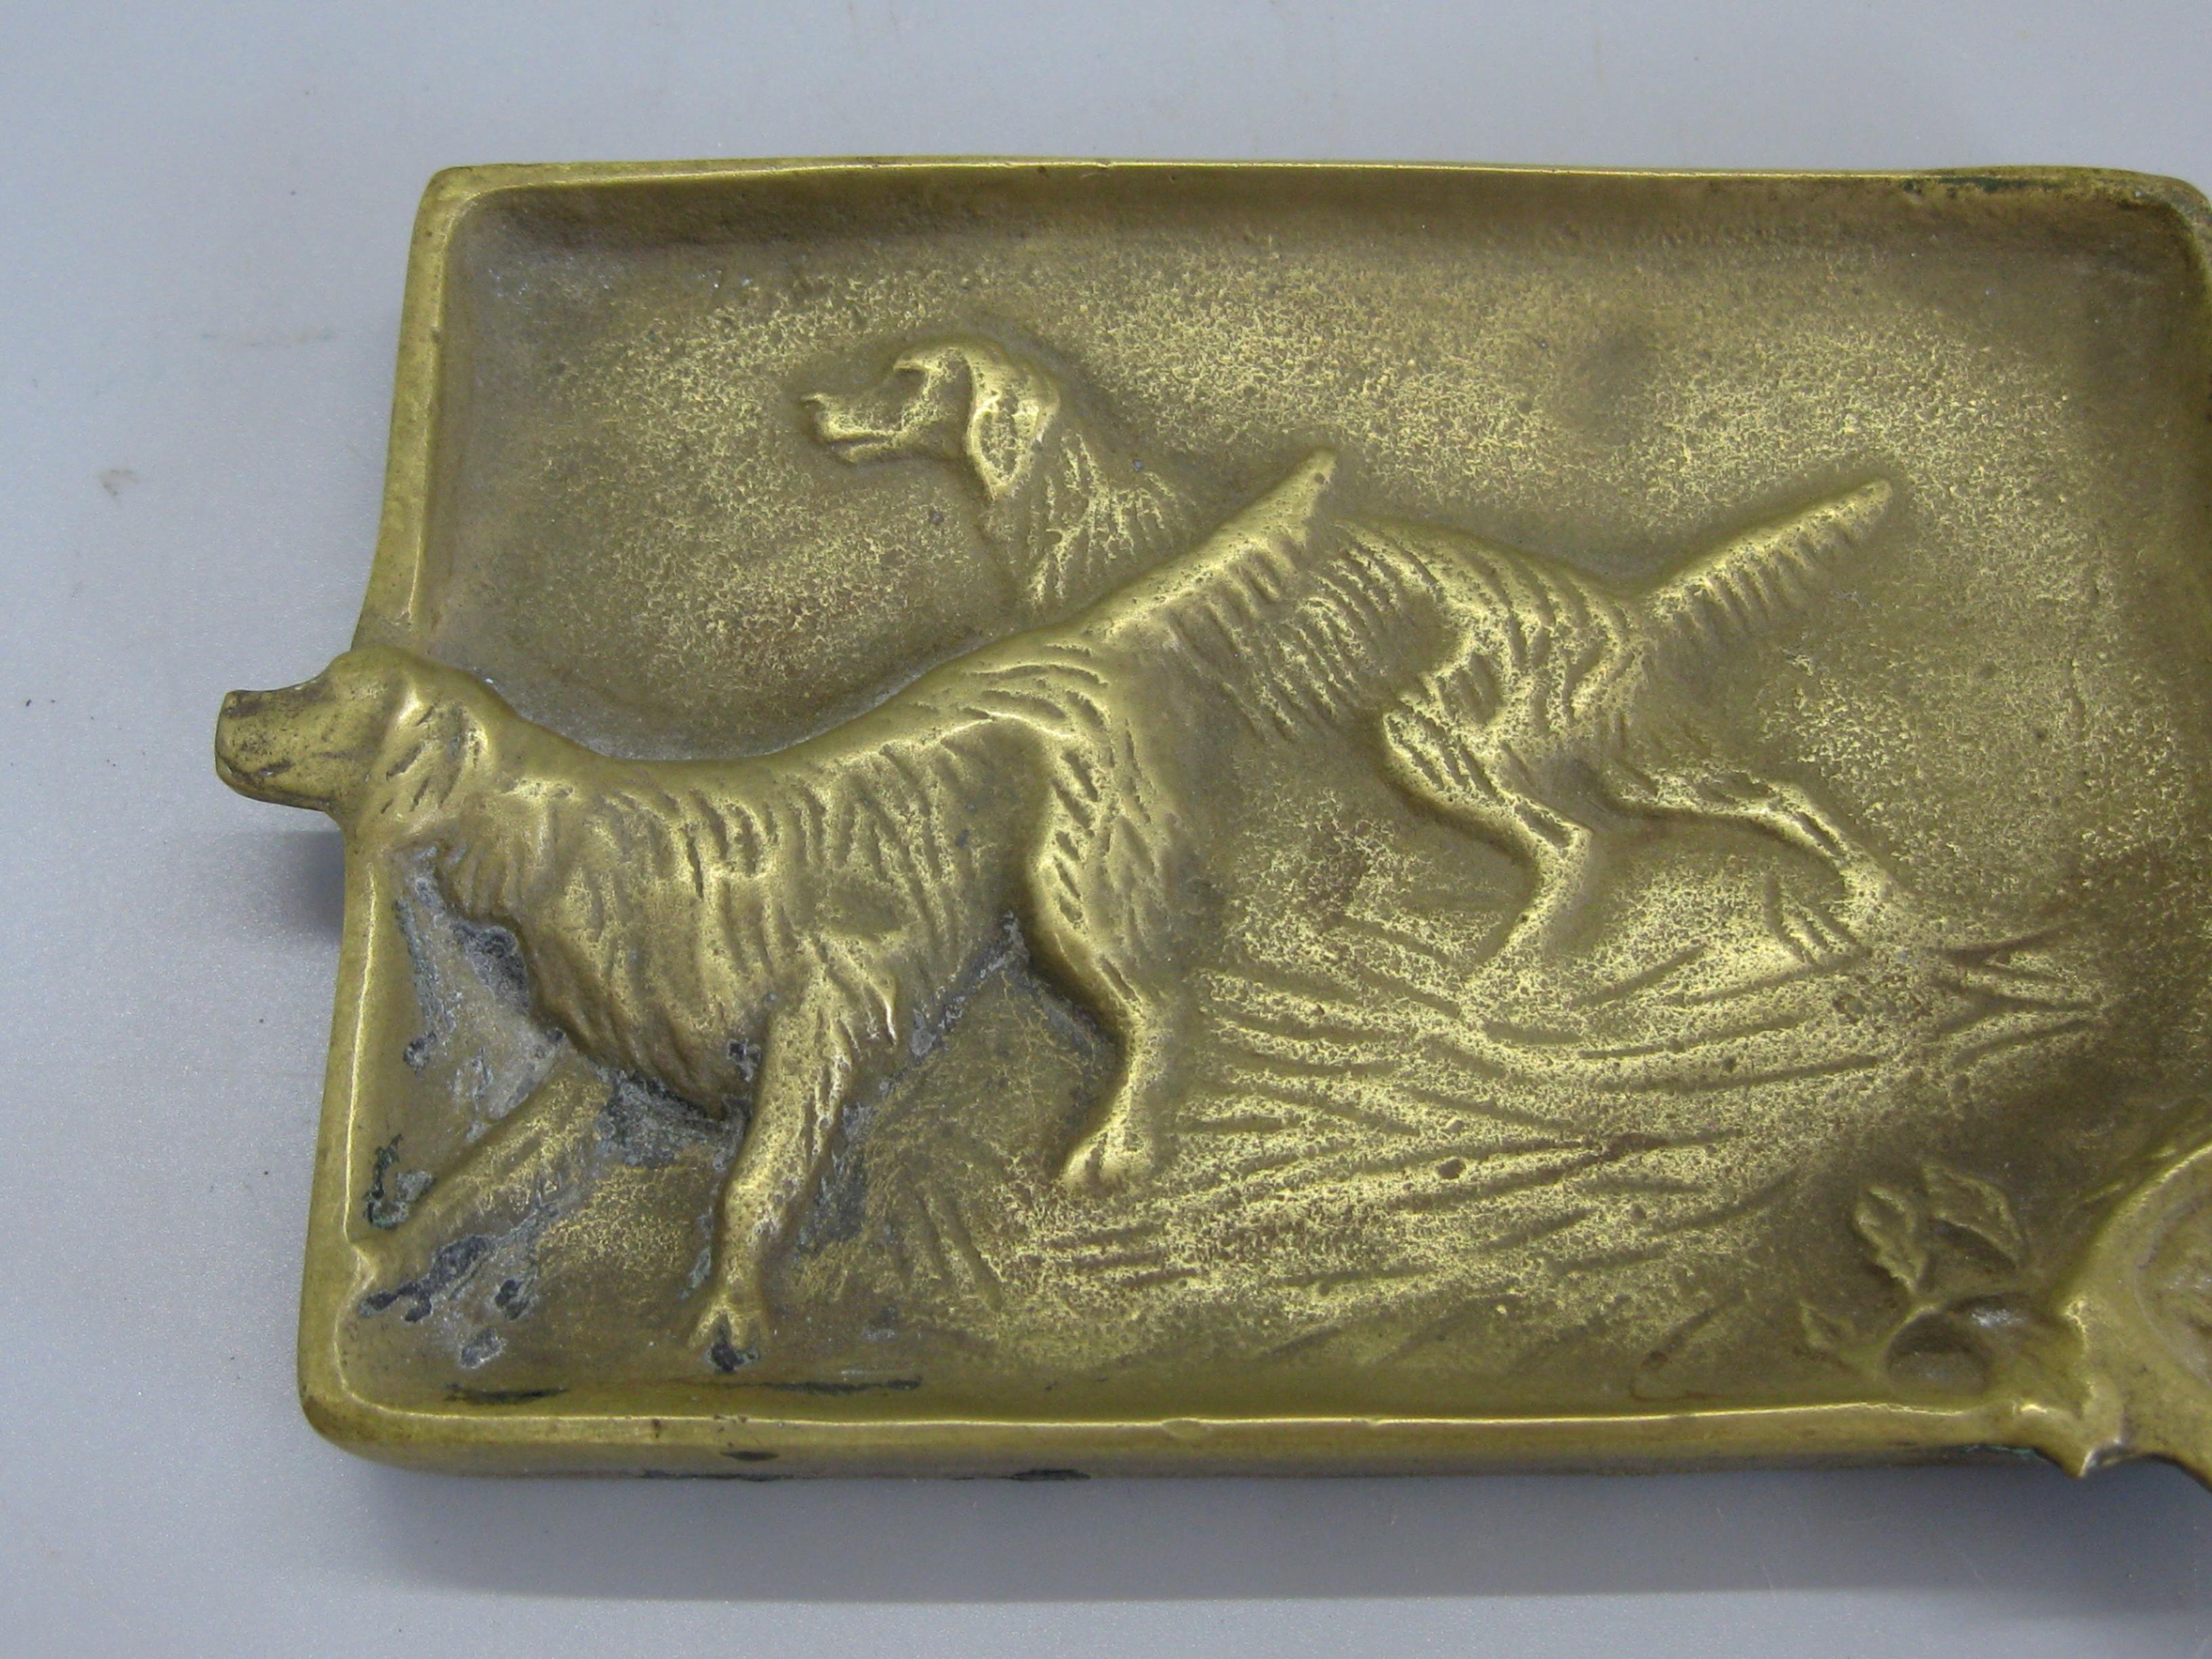 Beautiful antique brass Irish Setter dog figural ashtray dating from the 1920s. Signed on the back. Made by Virginia Metalcrafters. Made of cast brass and has a wonderful patina. In very nice original condition. Measures approximate: 5